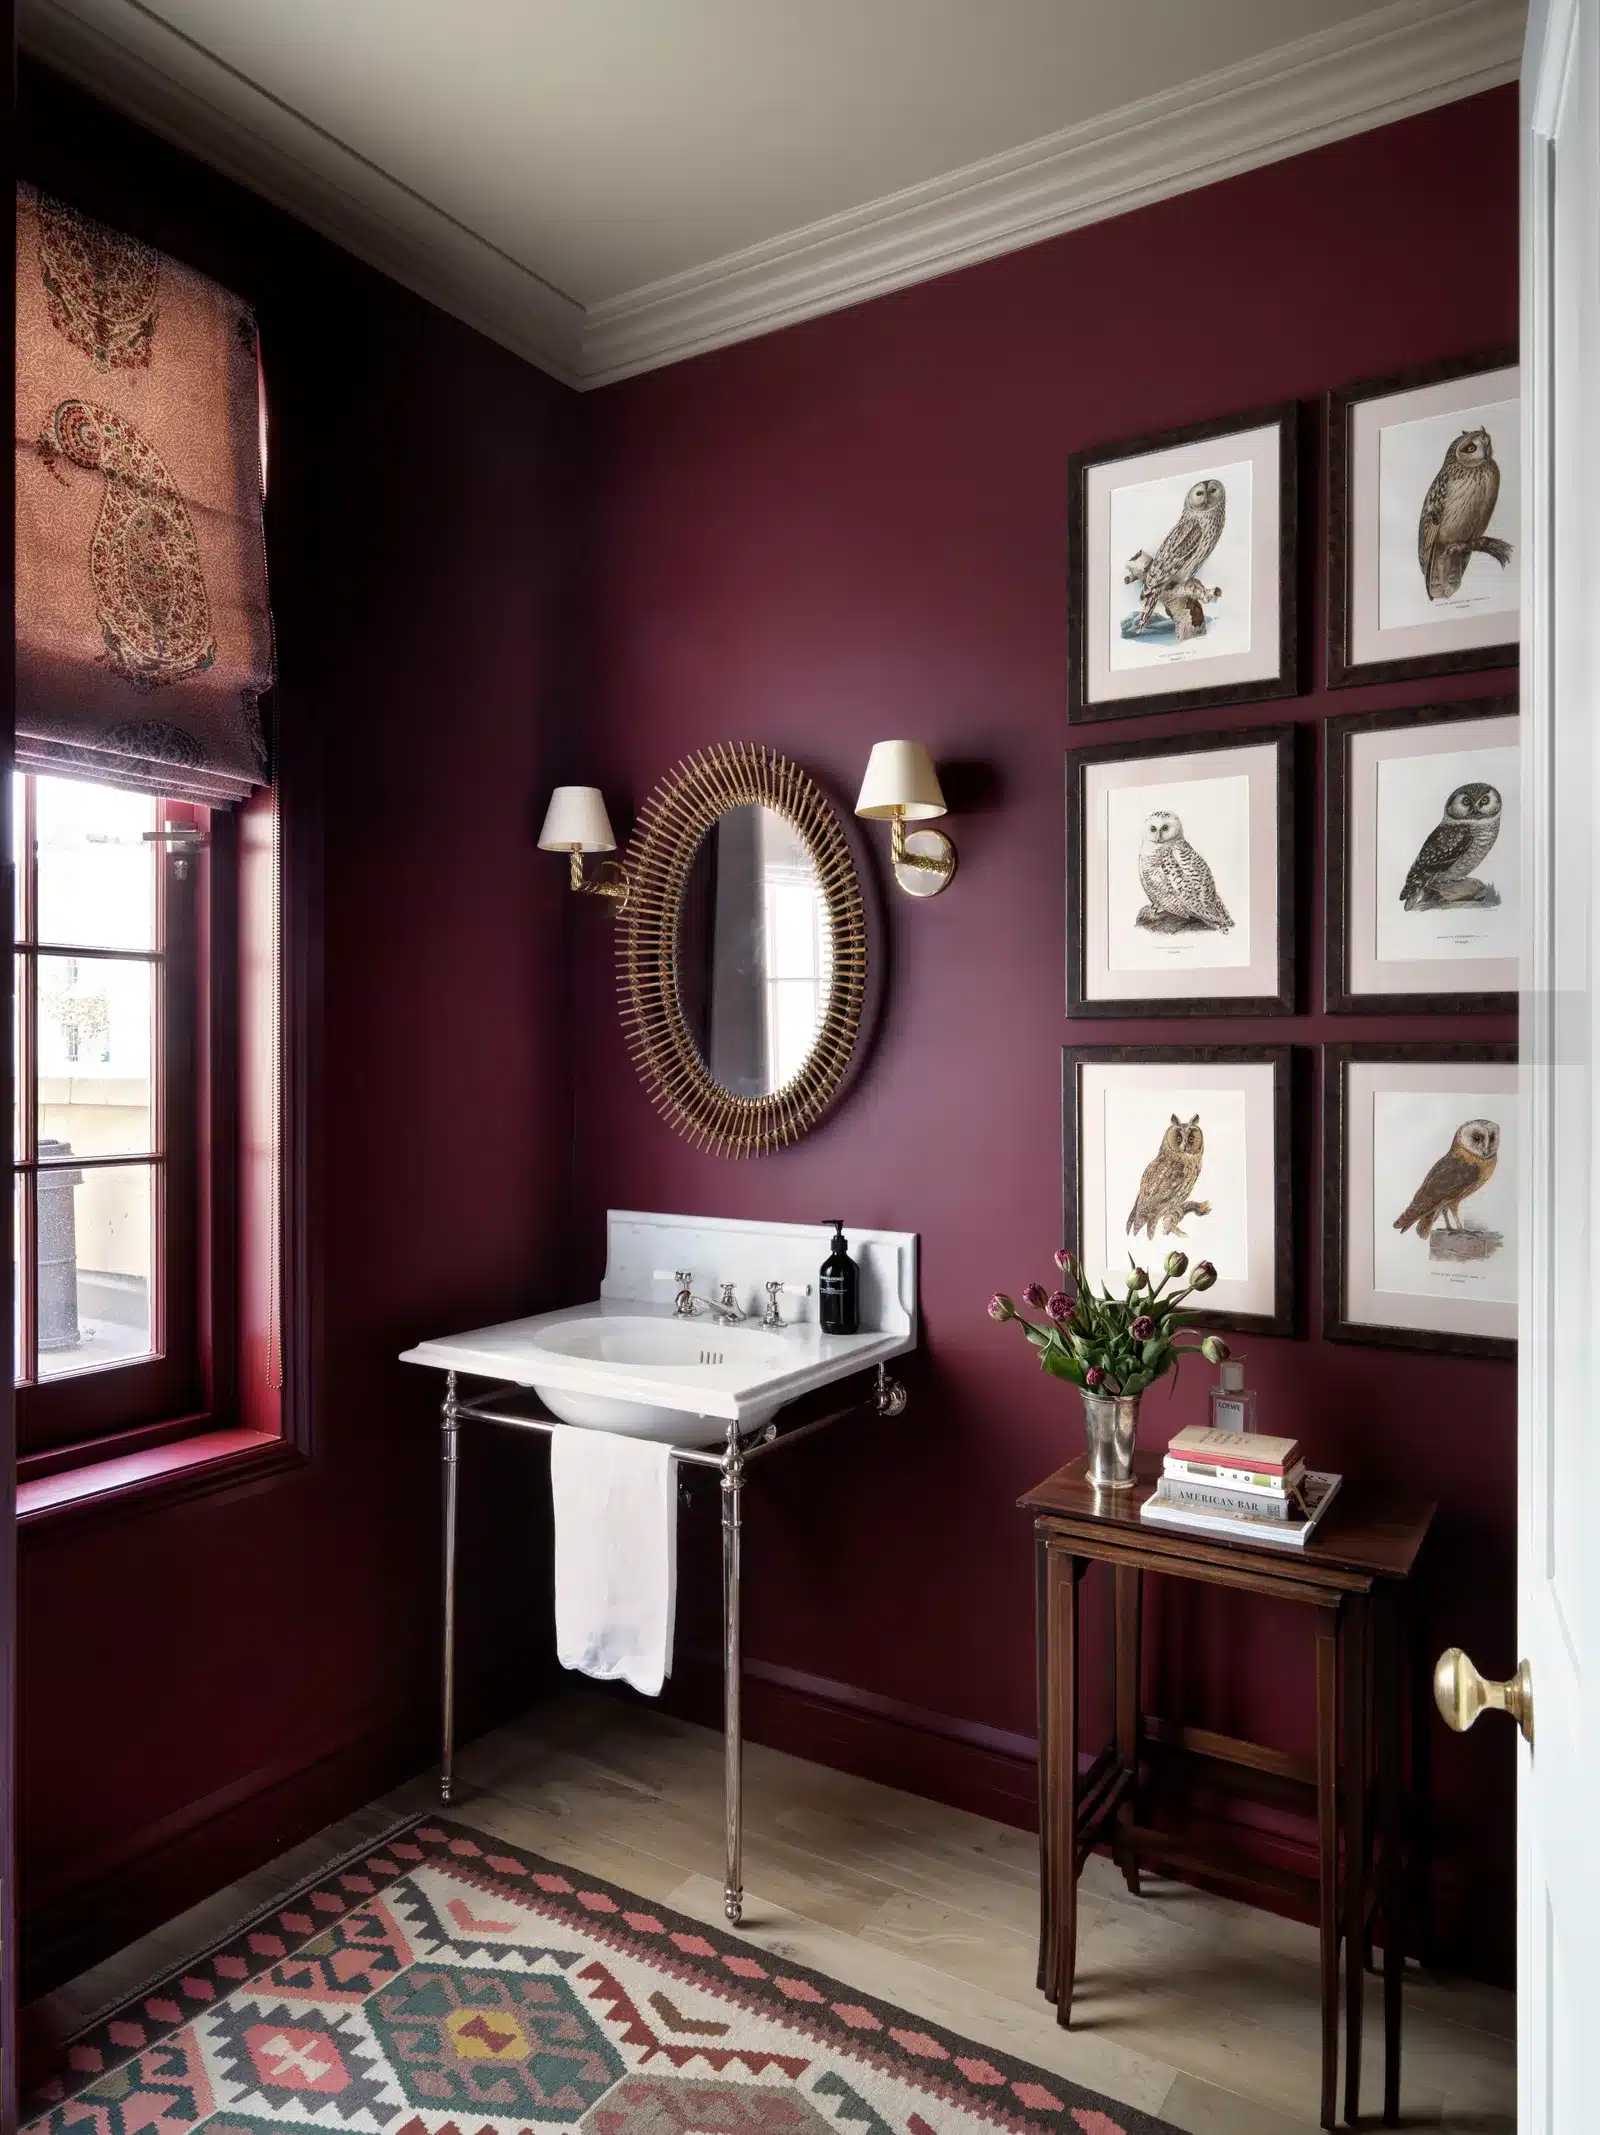 paint and paper library grenache de rosee sa simon brown architectural digest burgundy powder room